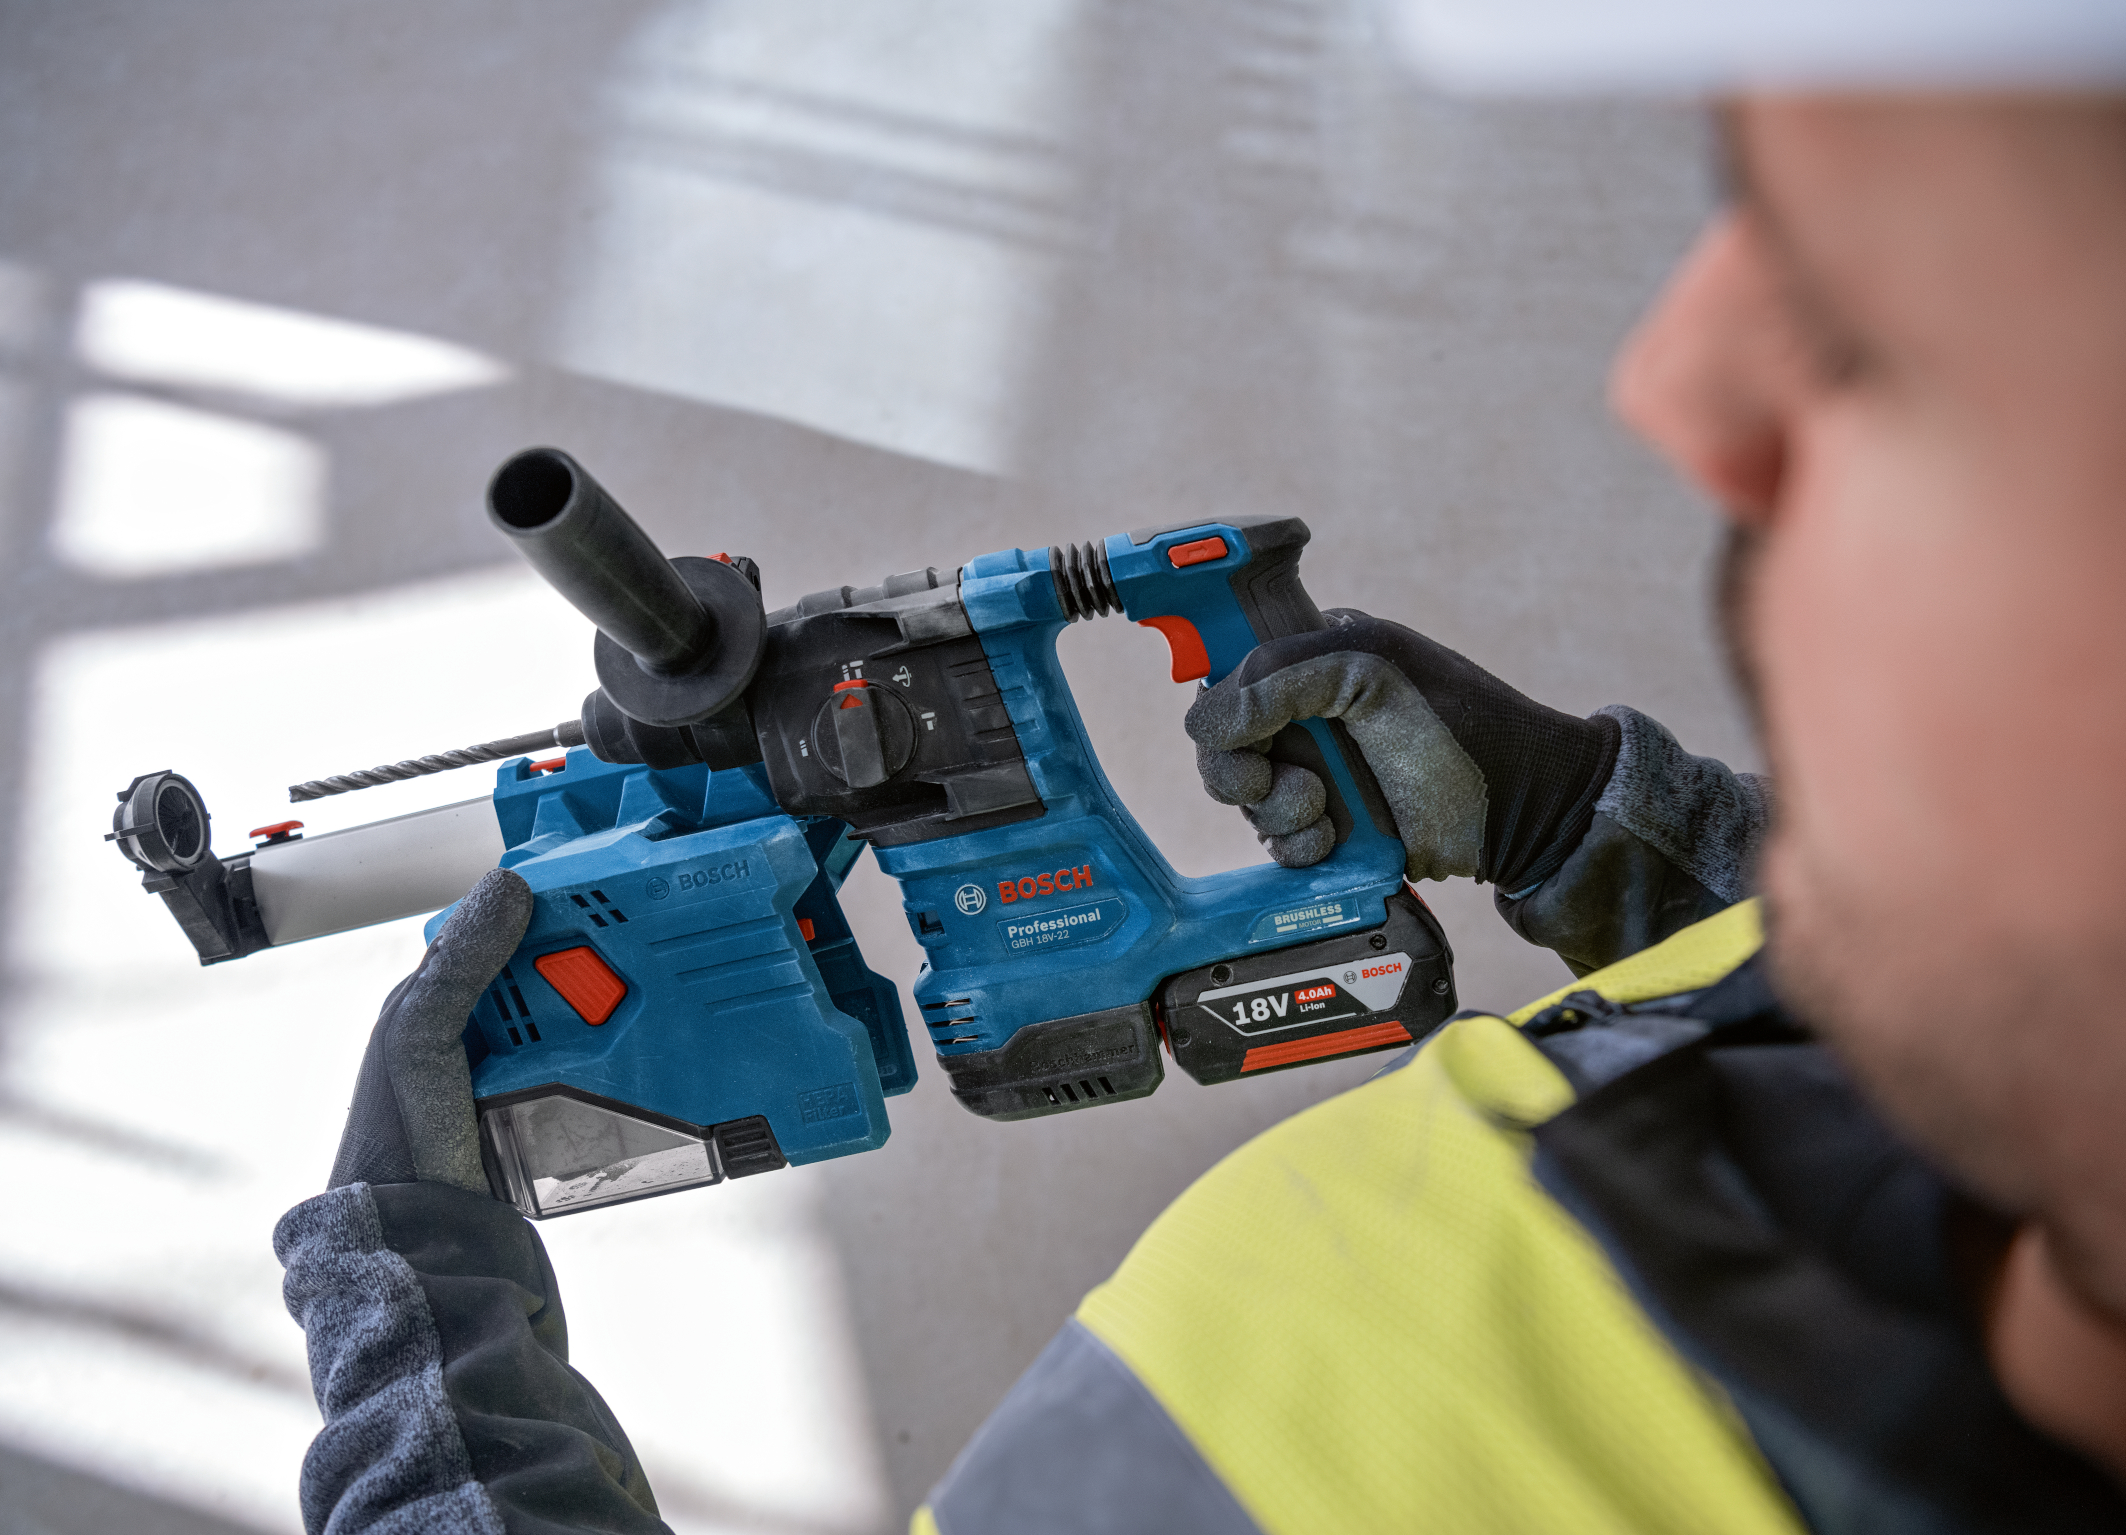 Efficient dust extraction for cleaner and healthier working: Compact professional cordless rotary hammer with dust extractor